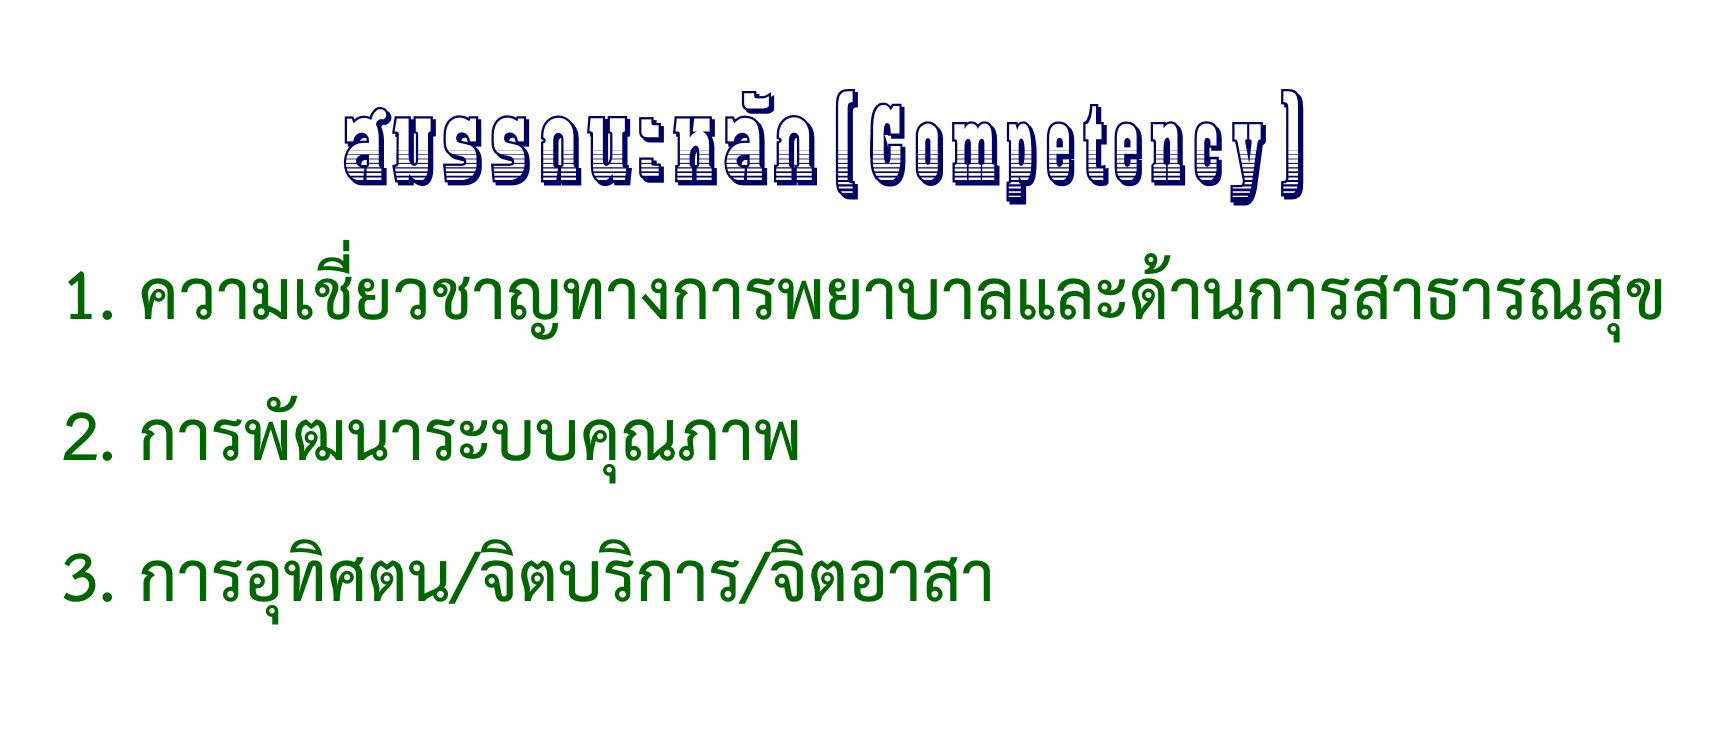 5.Competency